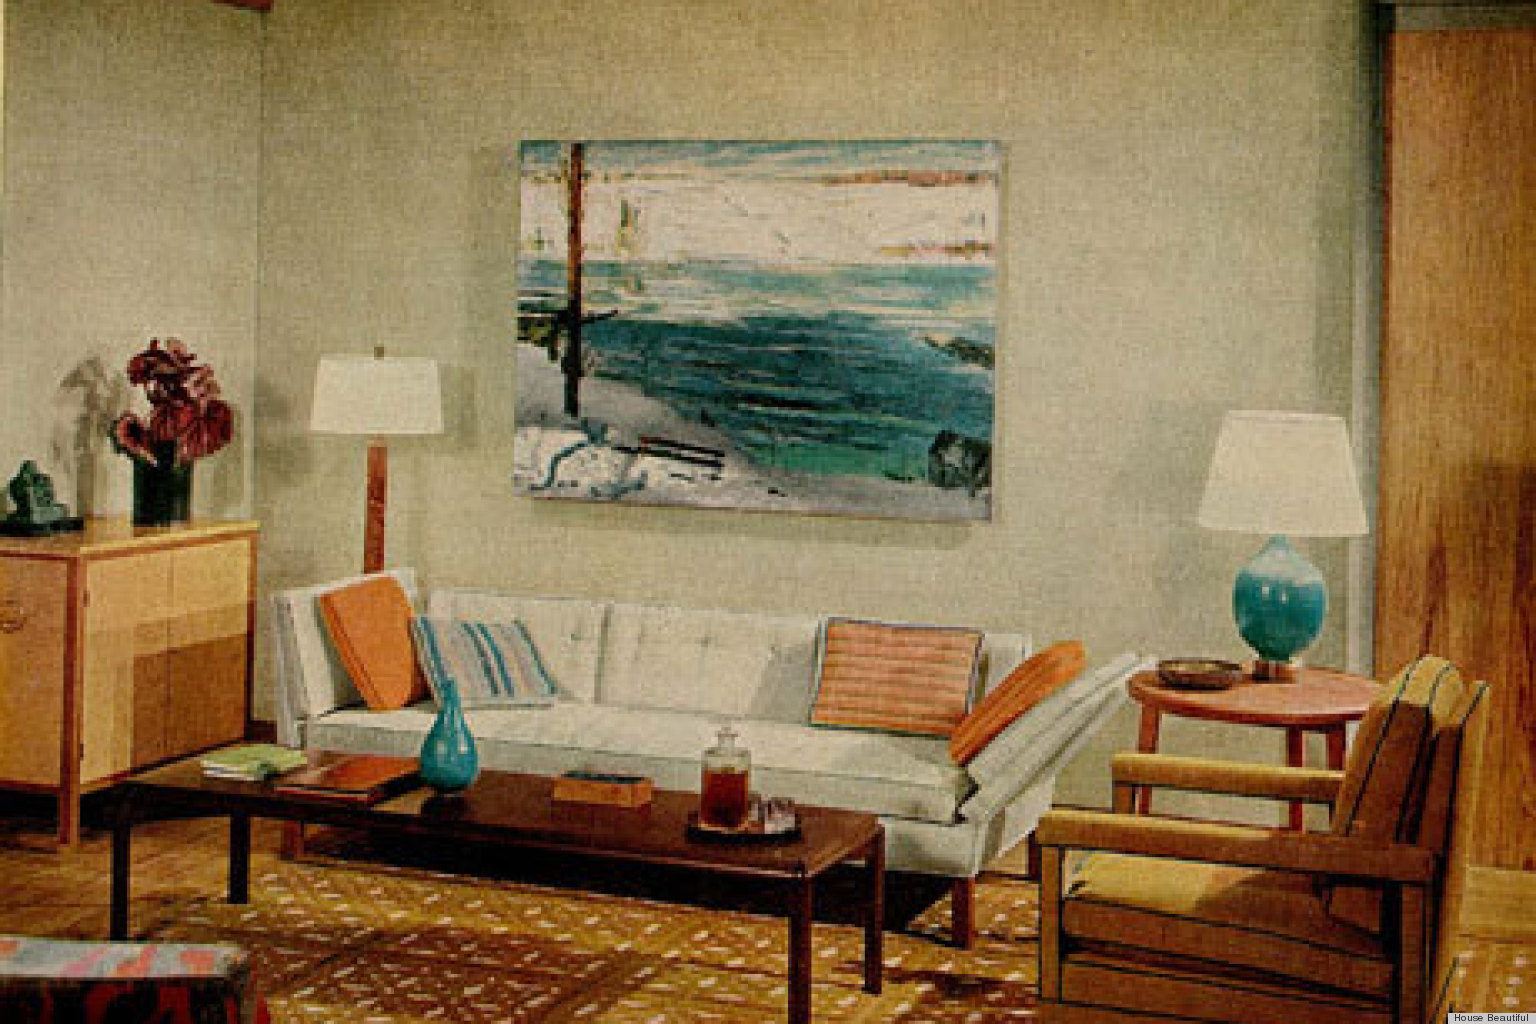 1960s Interiors Inspired By 'Mad Men,' From House Beautiful (PHOTOS